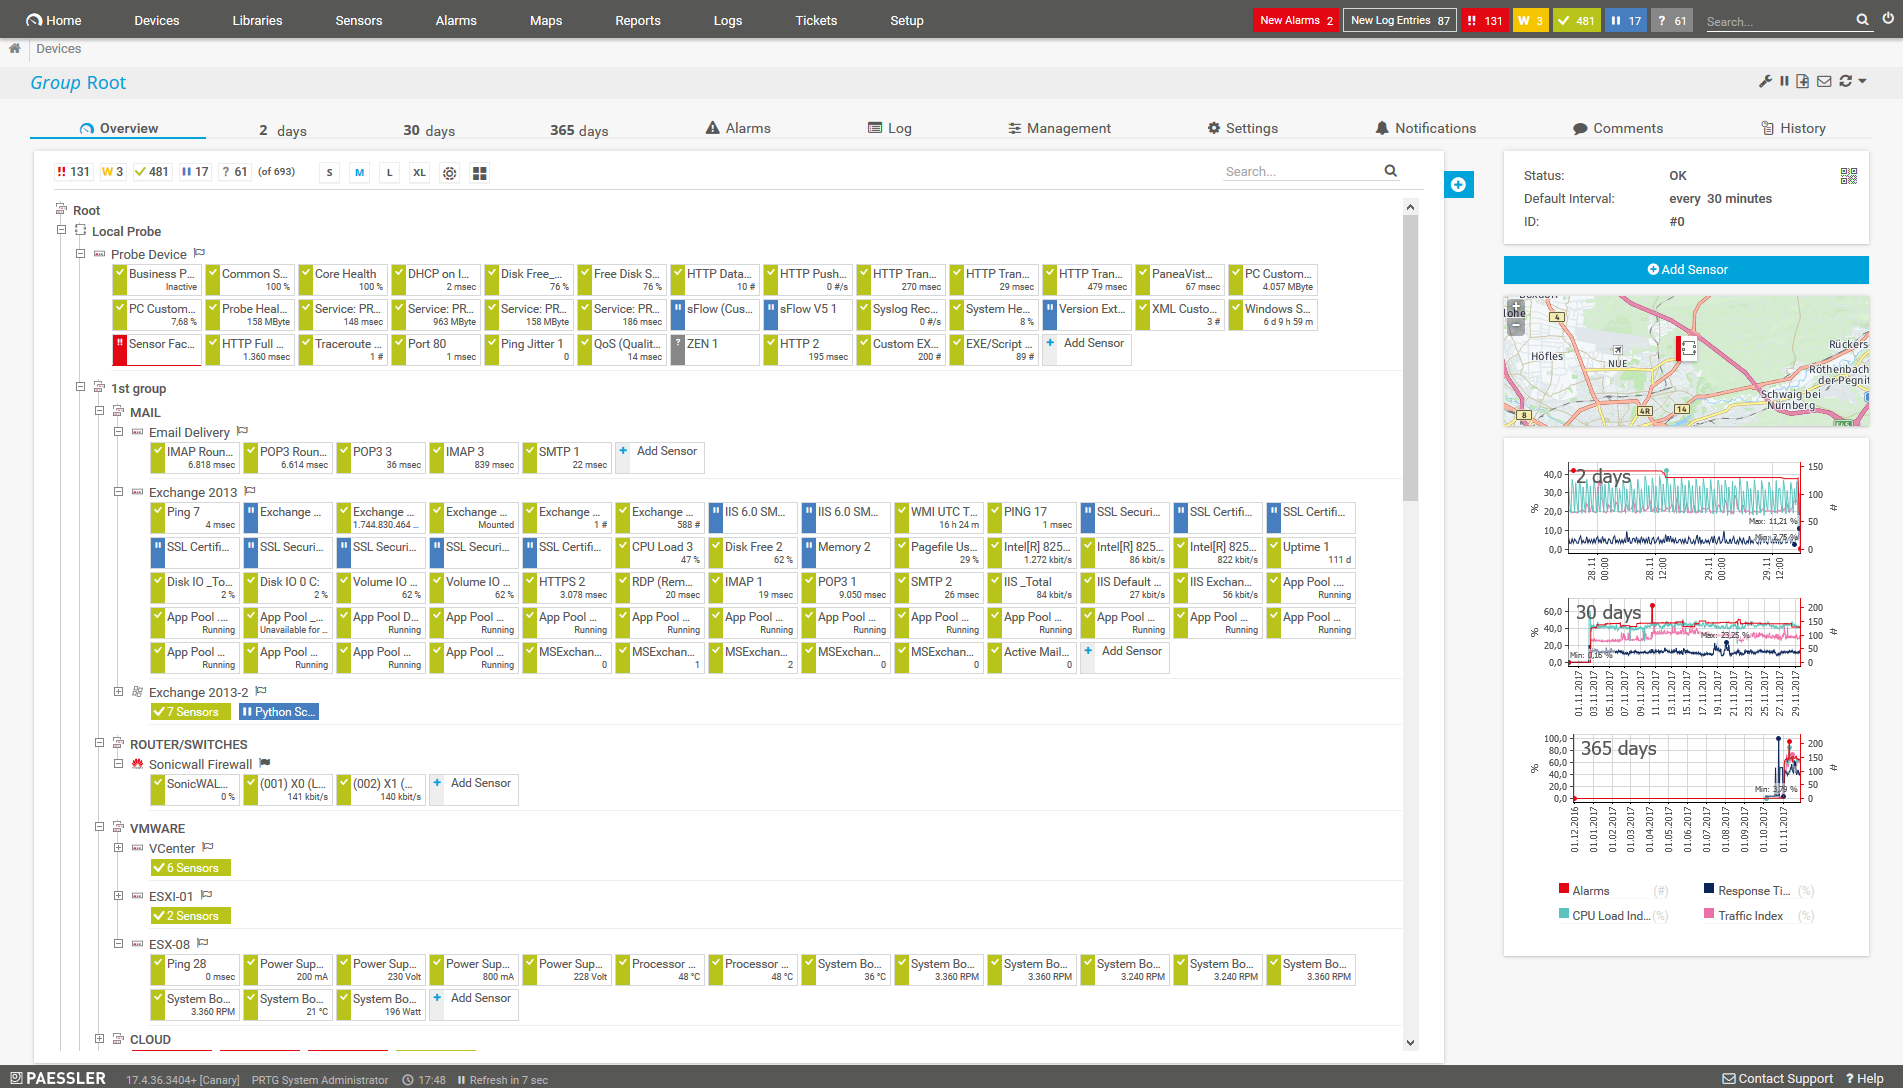 Device tree view of the entire monitoring setup